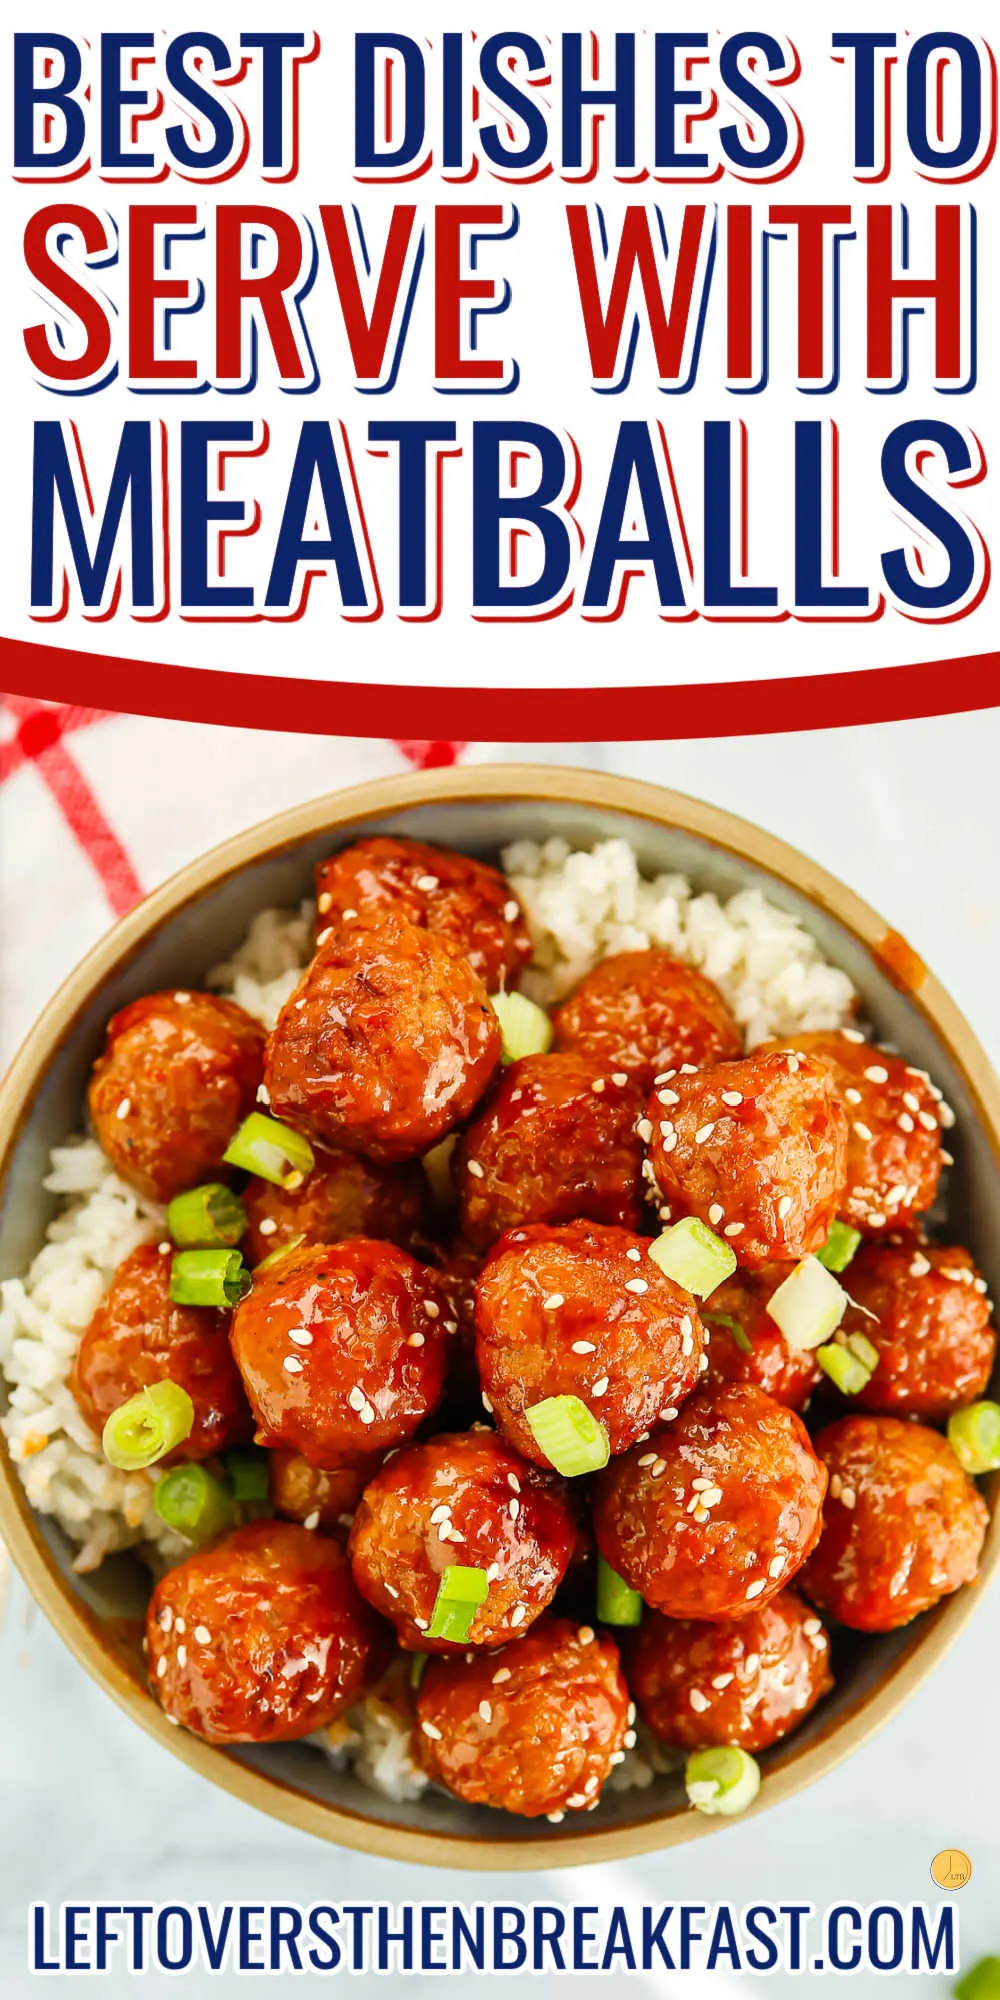 bowl of meatballs with text "best side dishes to serve with"